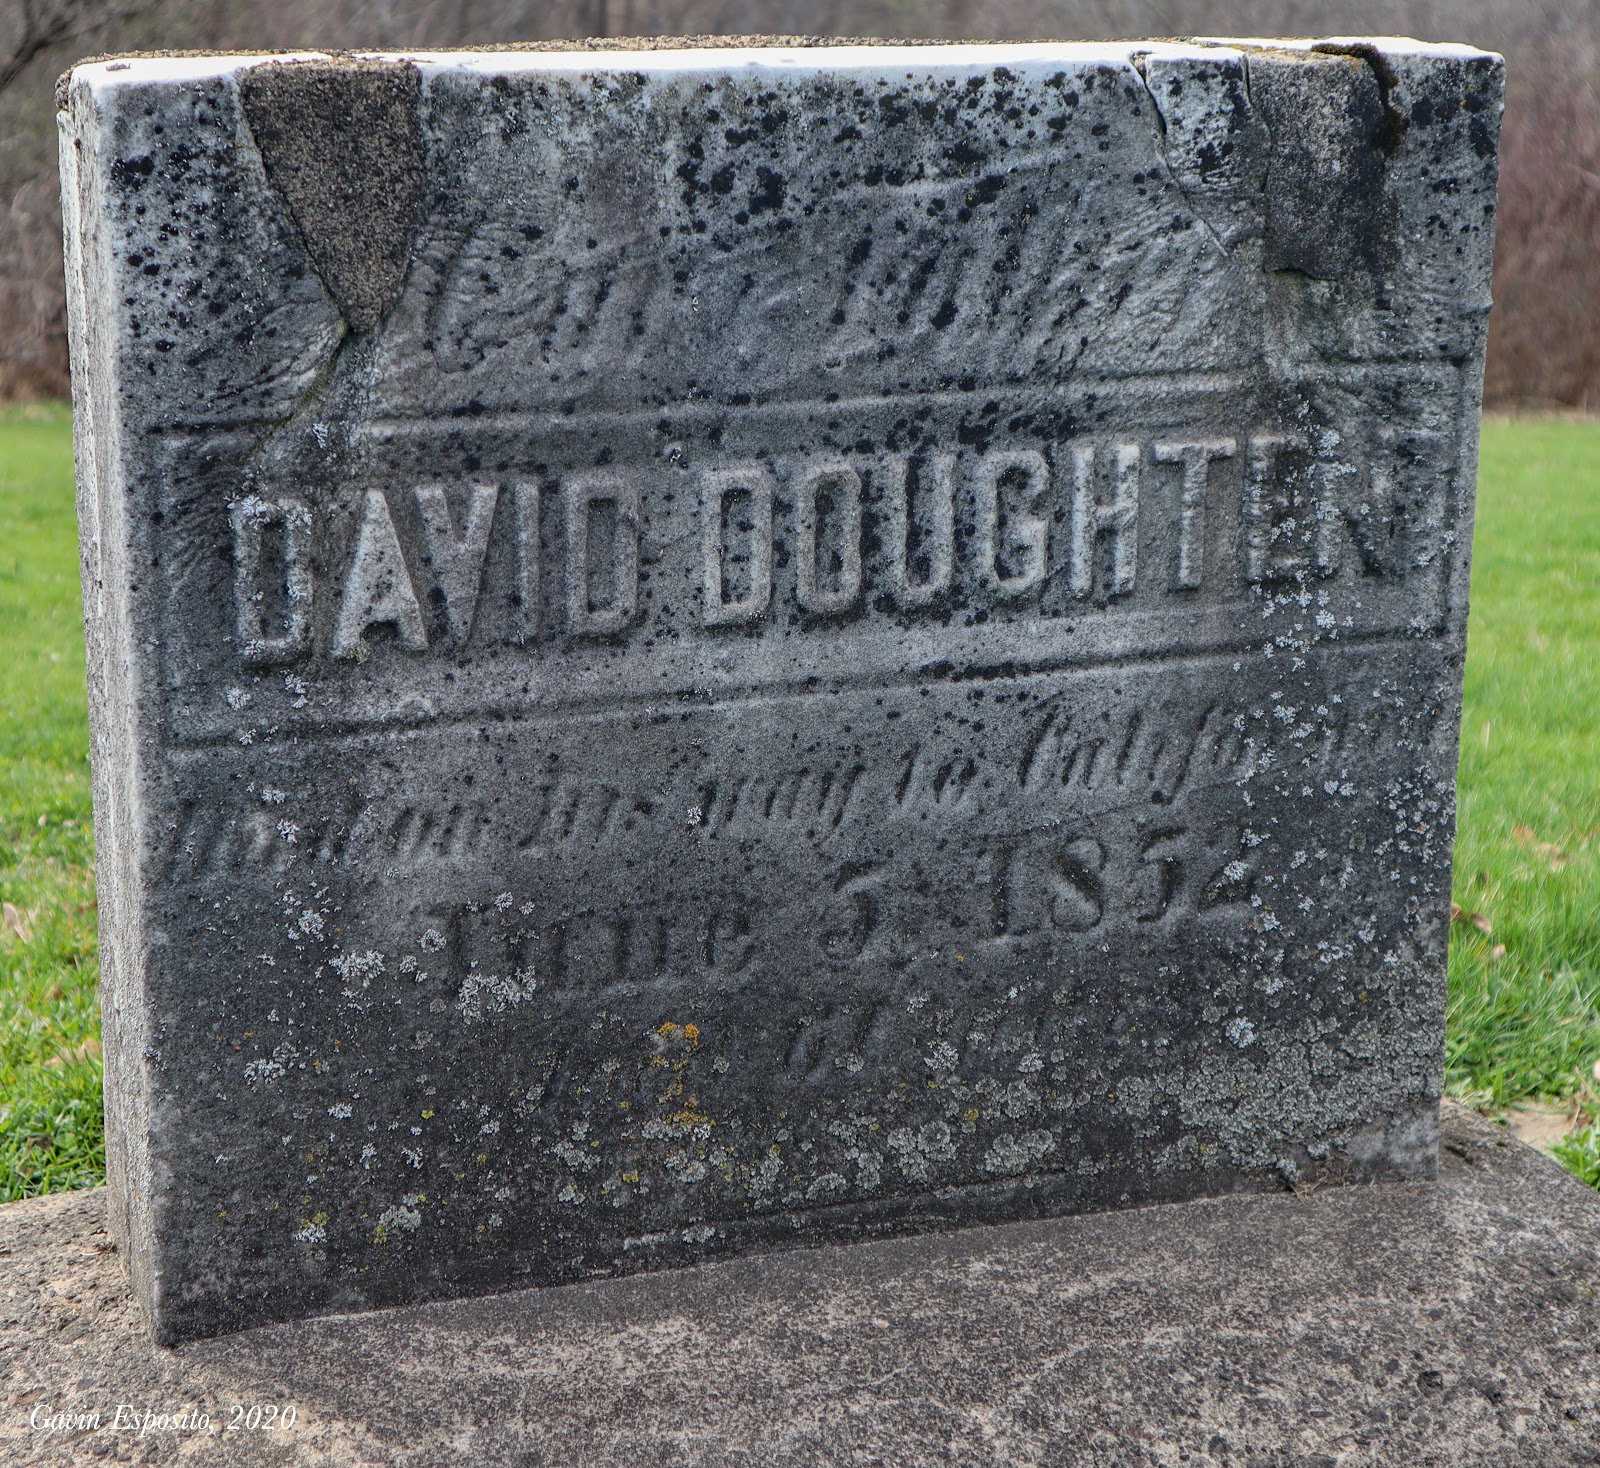 Although his remains lie on the Wyoming prairie, a headstone for David Doughten stands in Old North Cemetery, inscribed with the epipath “Our Father, David Doughten - died on his way to California, June 5, 1852 - Aged 61 yrs.” (Photo by Gavin Esposito).